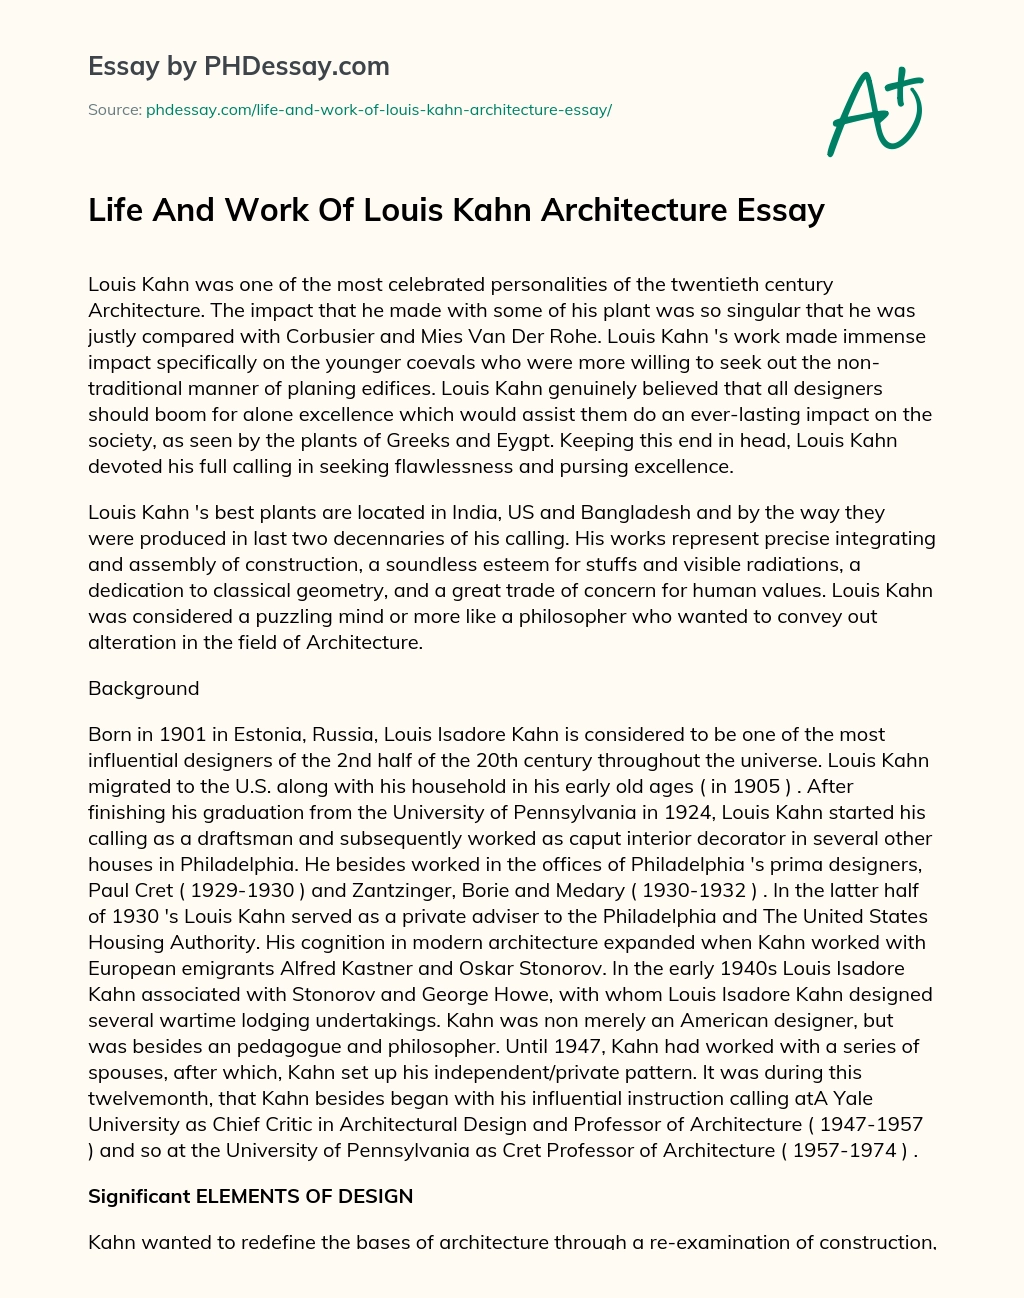 Life And Work Of Louis Kahn Architecture Essay essay